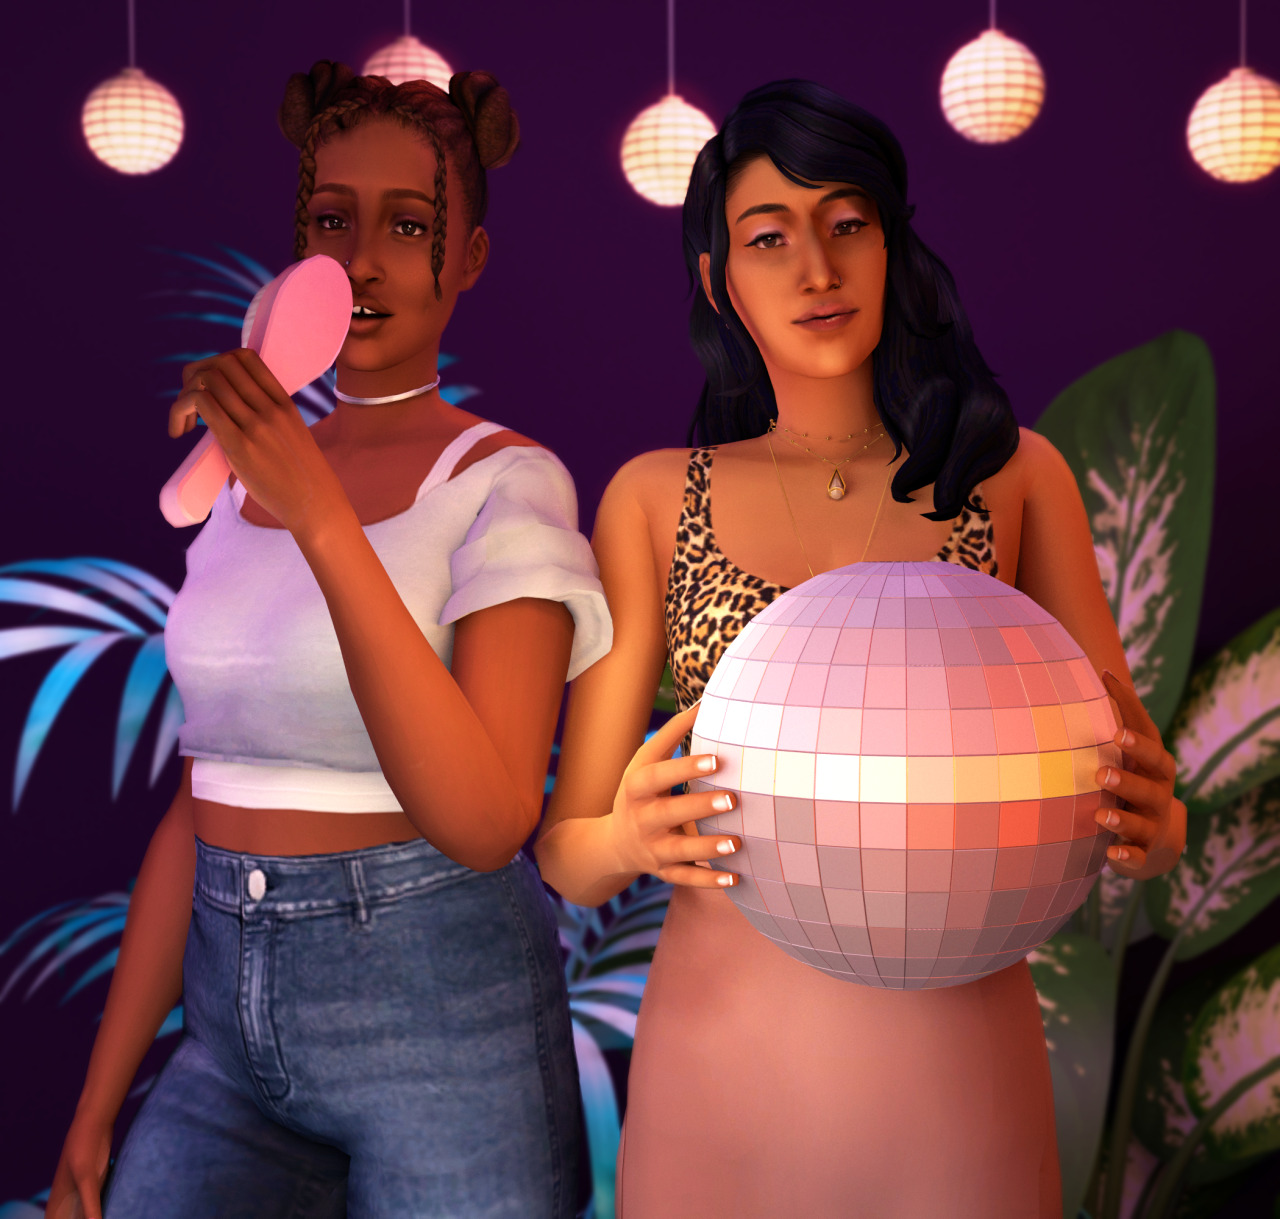 All grown up twenty one years oldSinging on her hairbrush microphoneKinda looks like me with the lights down lowIt’s her own sad disco 🎵 #this song and all of rising are top tier  #highly recommend!! #🦔#edit#story extras#Gemma Taylor#Adhira Mahajan#sims#sims 4#ts4#sims render #sims 4 render #ts4 render#sims edit #sims 4 edit #ts4 edit#maxismix#maxis mix